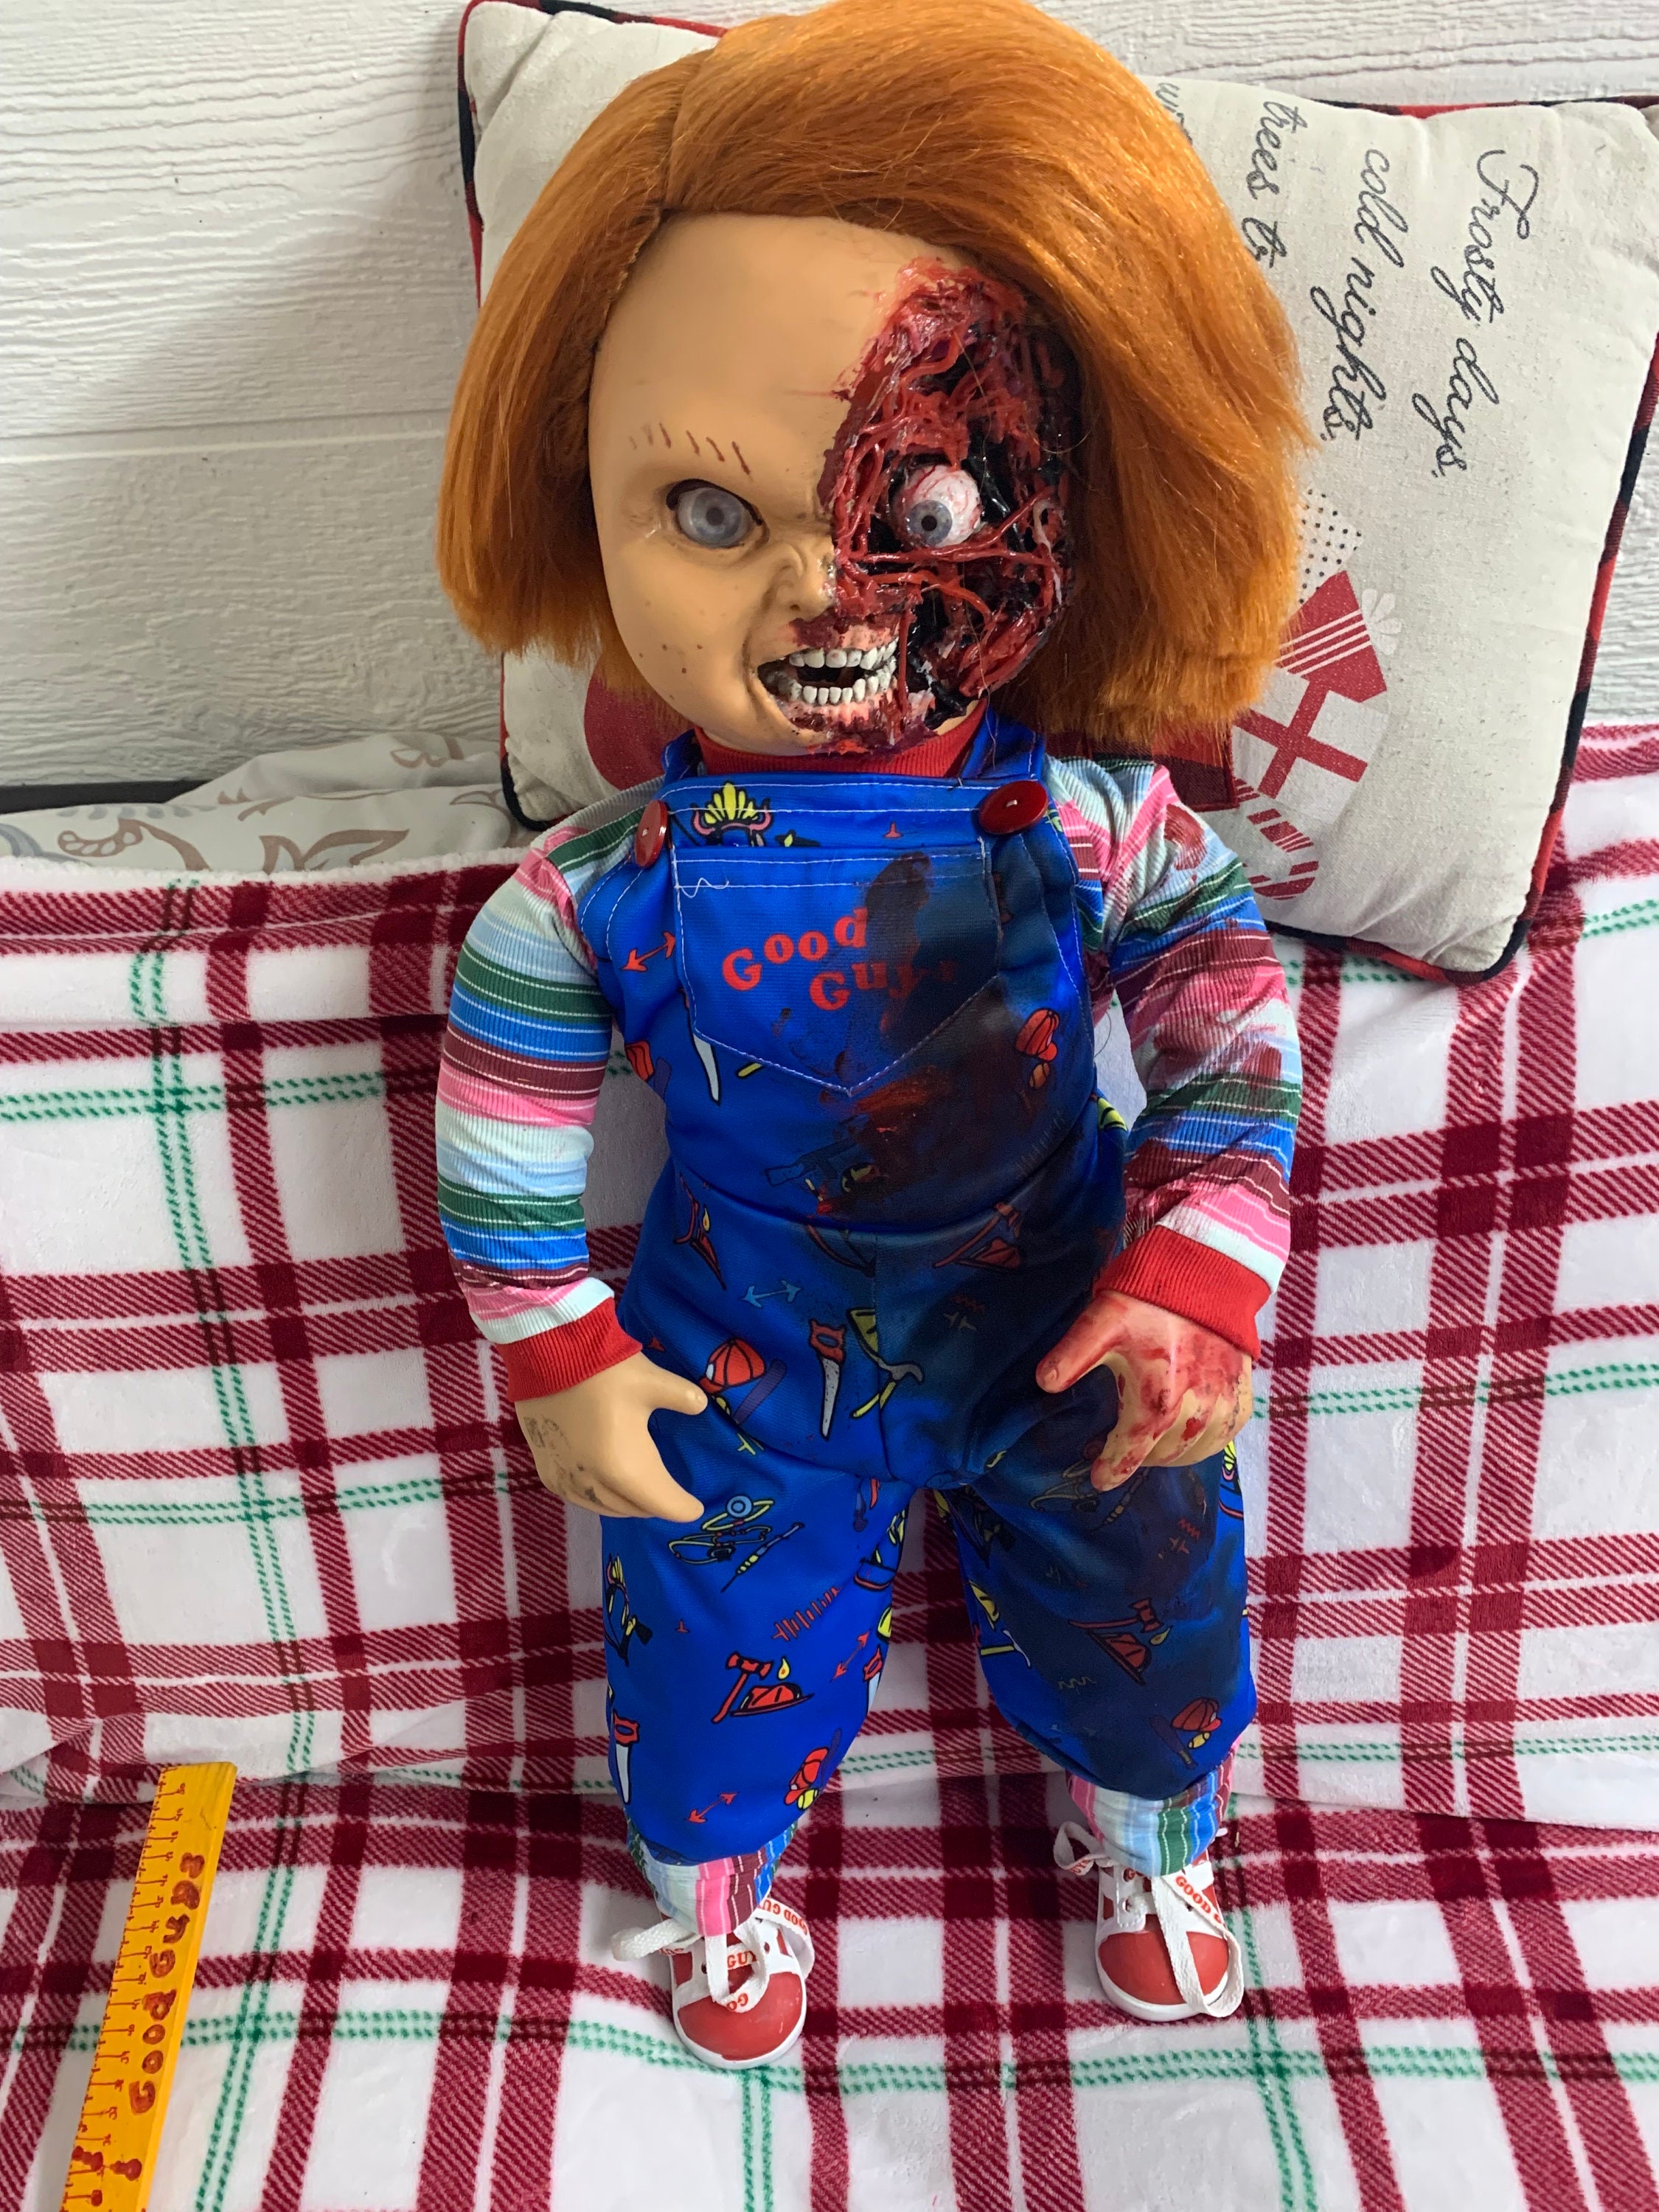 Chucky Doll Childs Play 3 Life Size